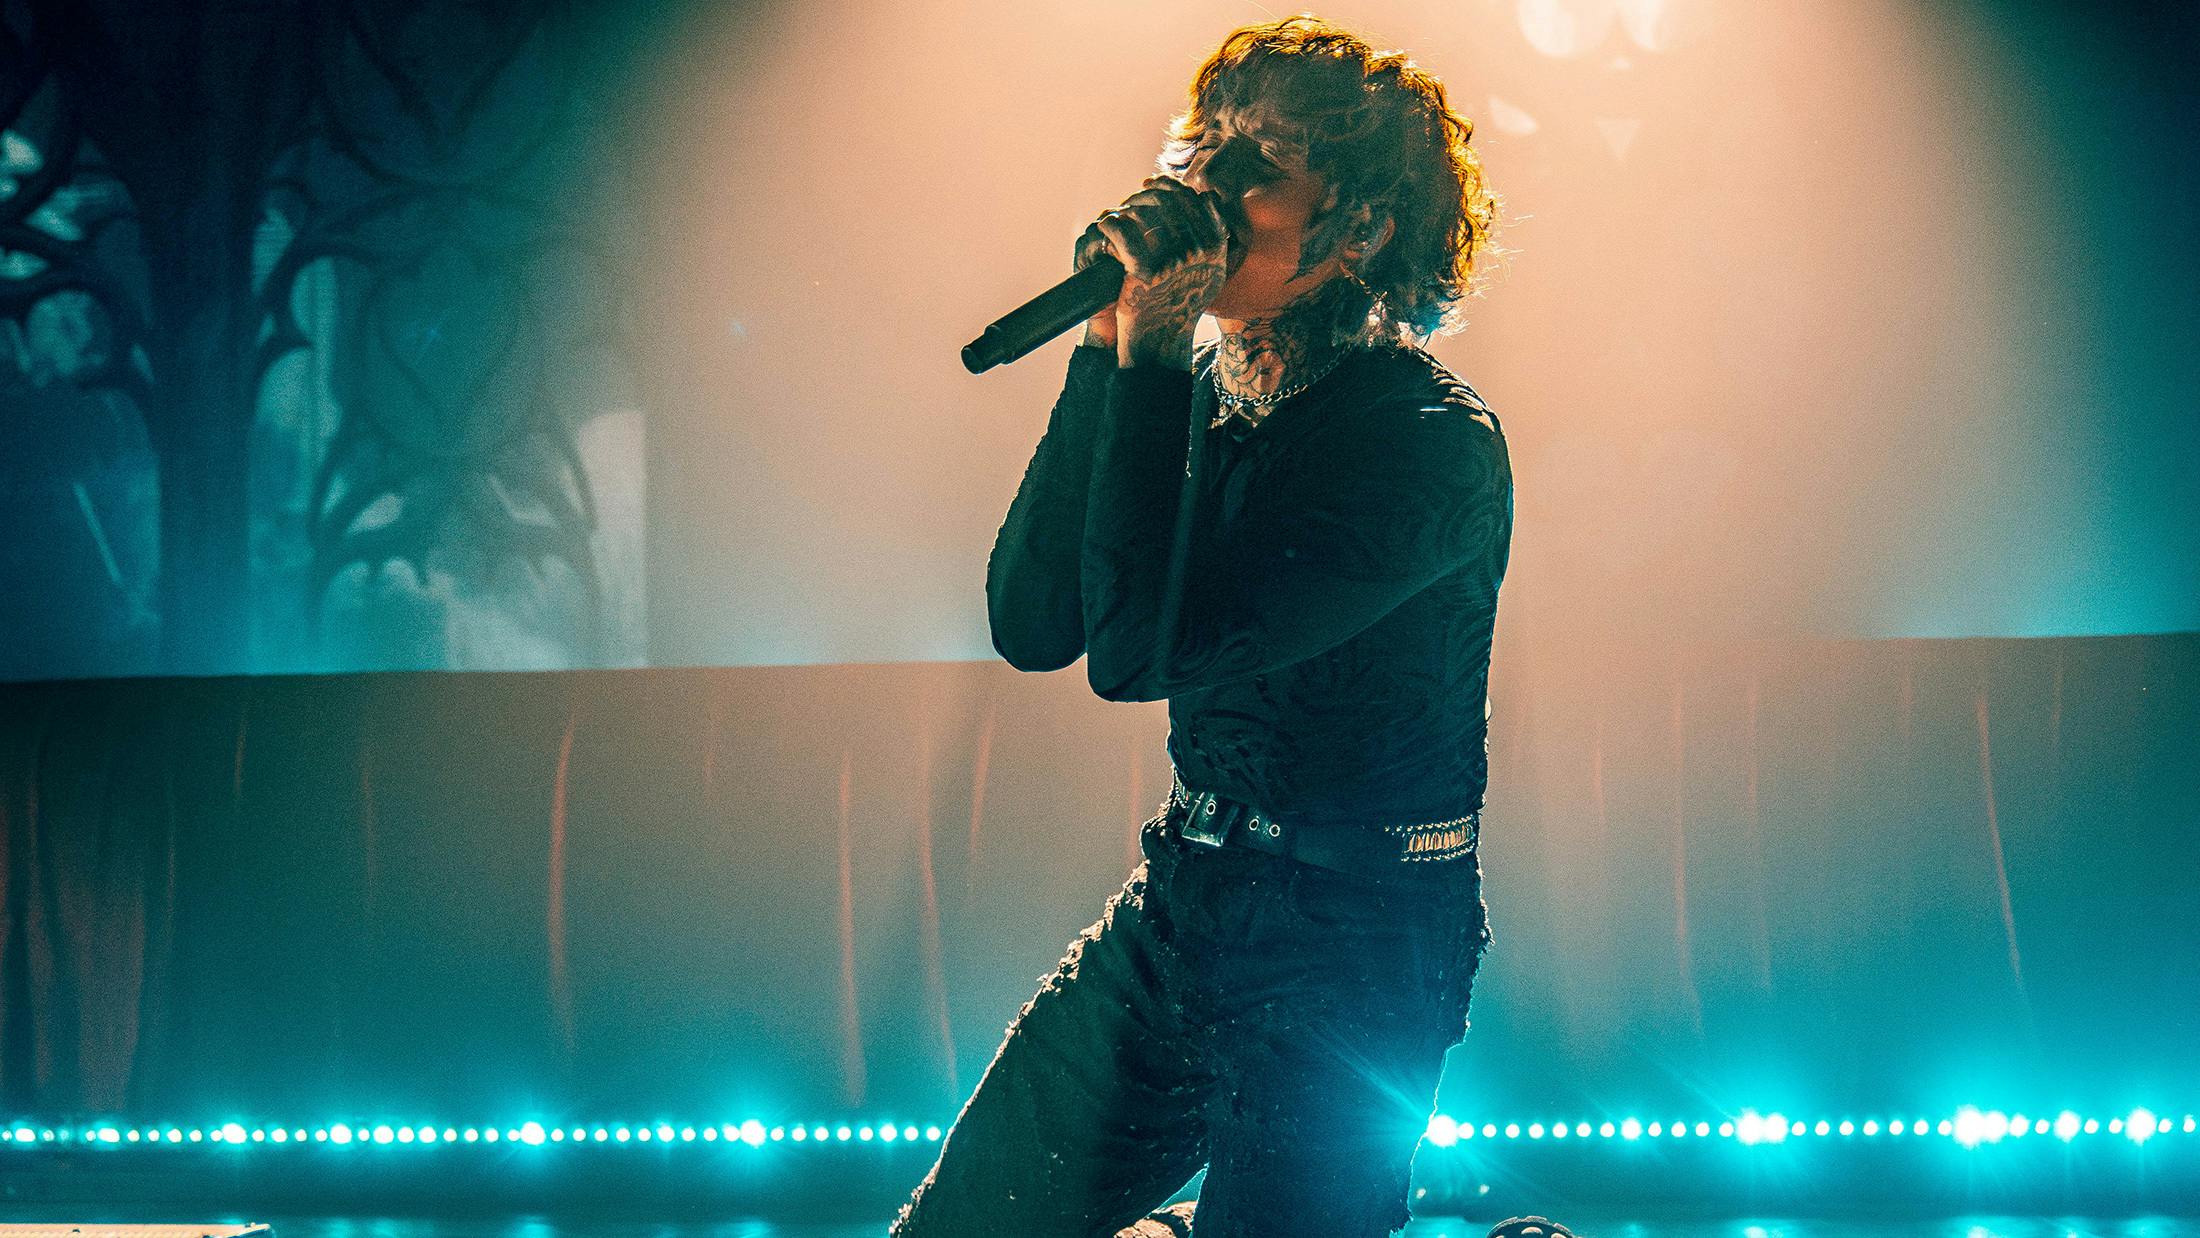 In pictures: Bring Me The Horizon's epic show with Spiritbox in Las Vegas